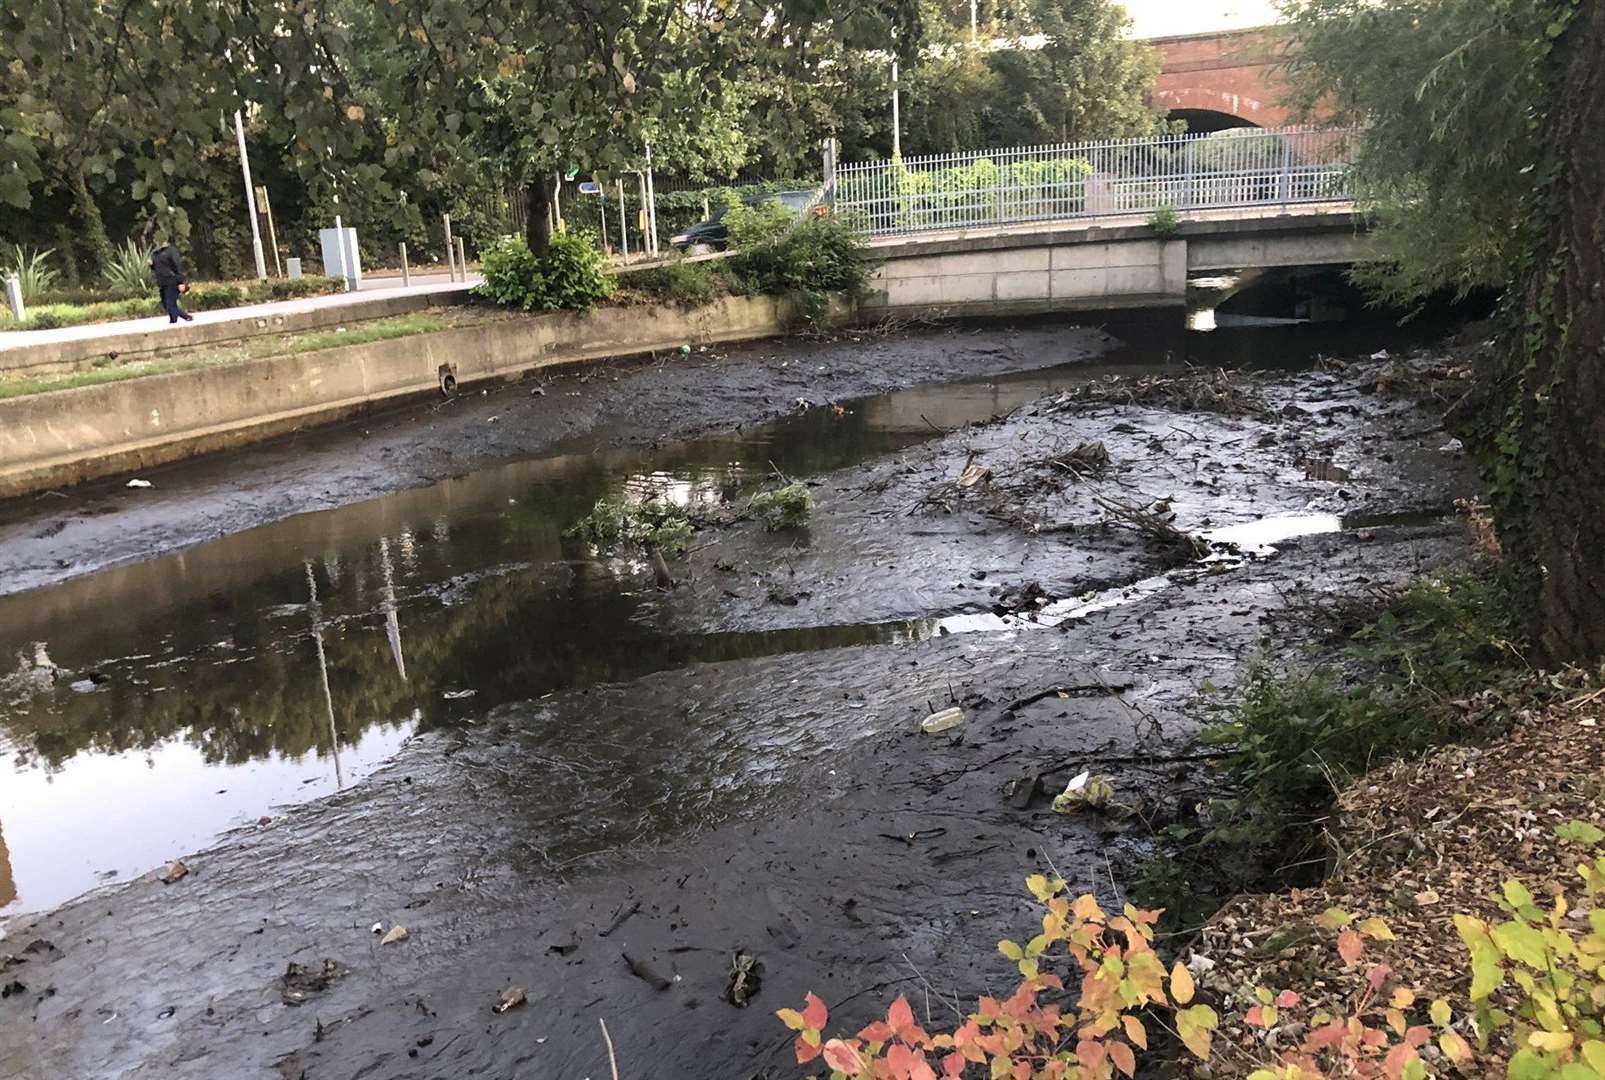 Environmental officers were called out to the River Darent